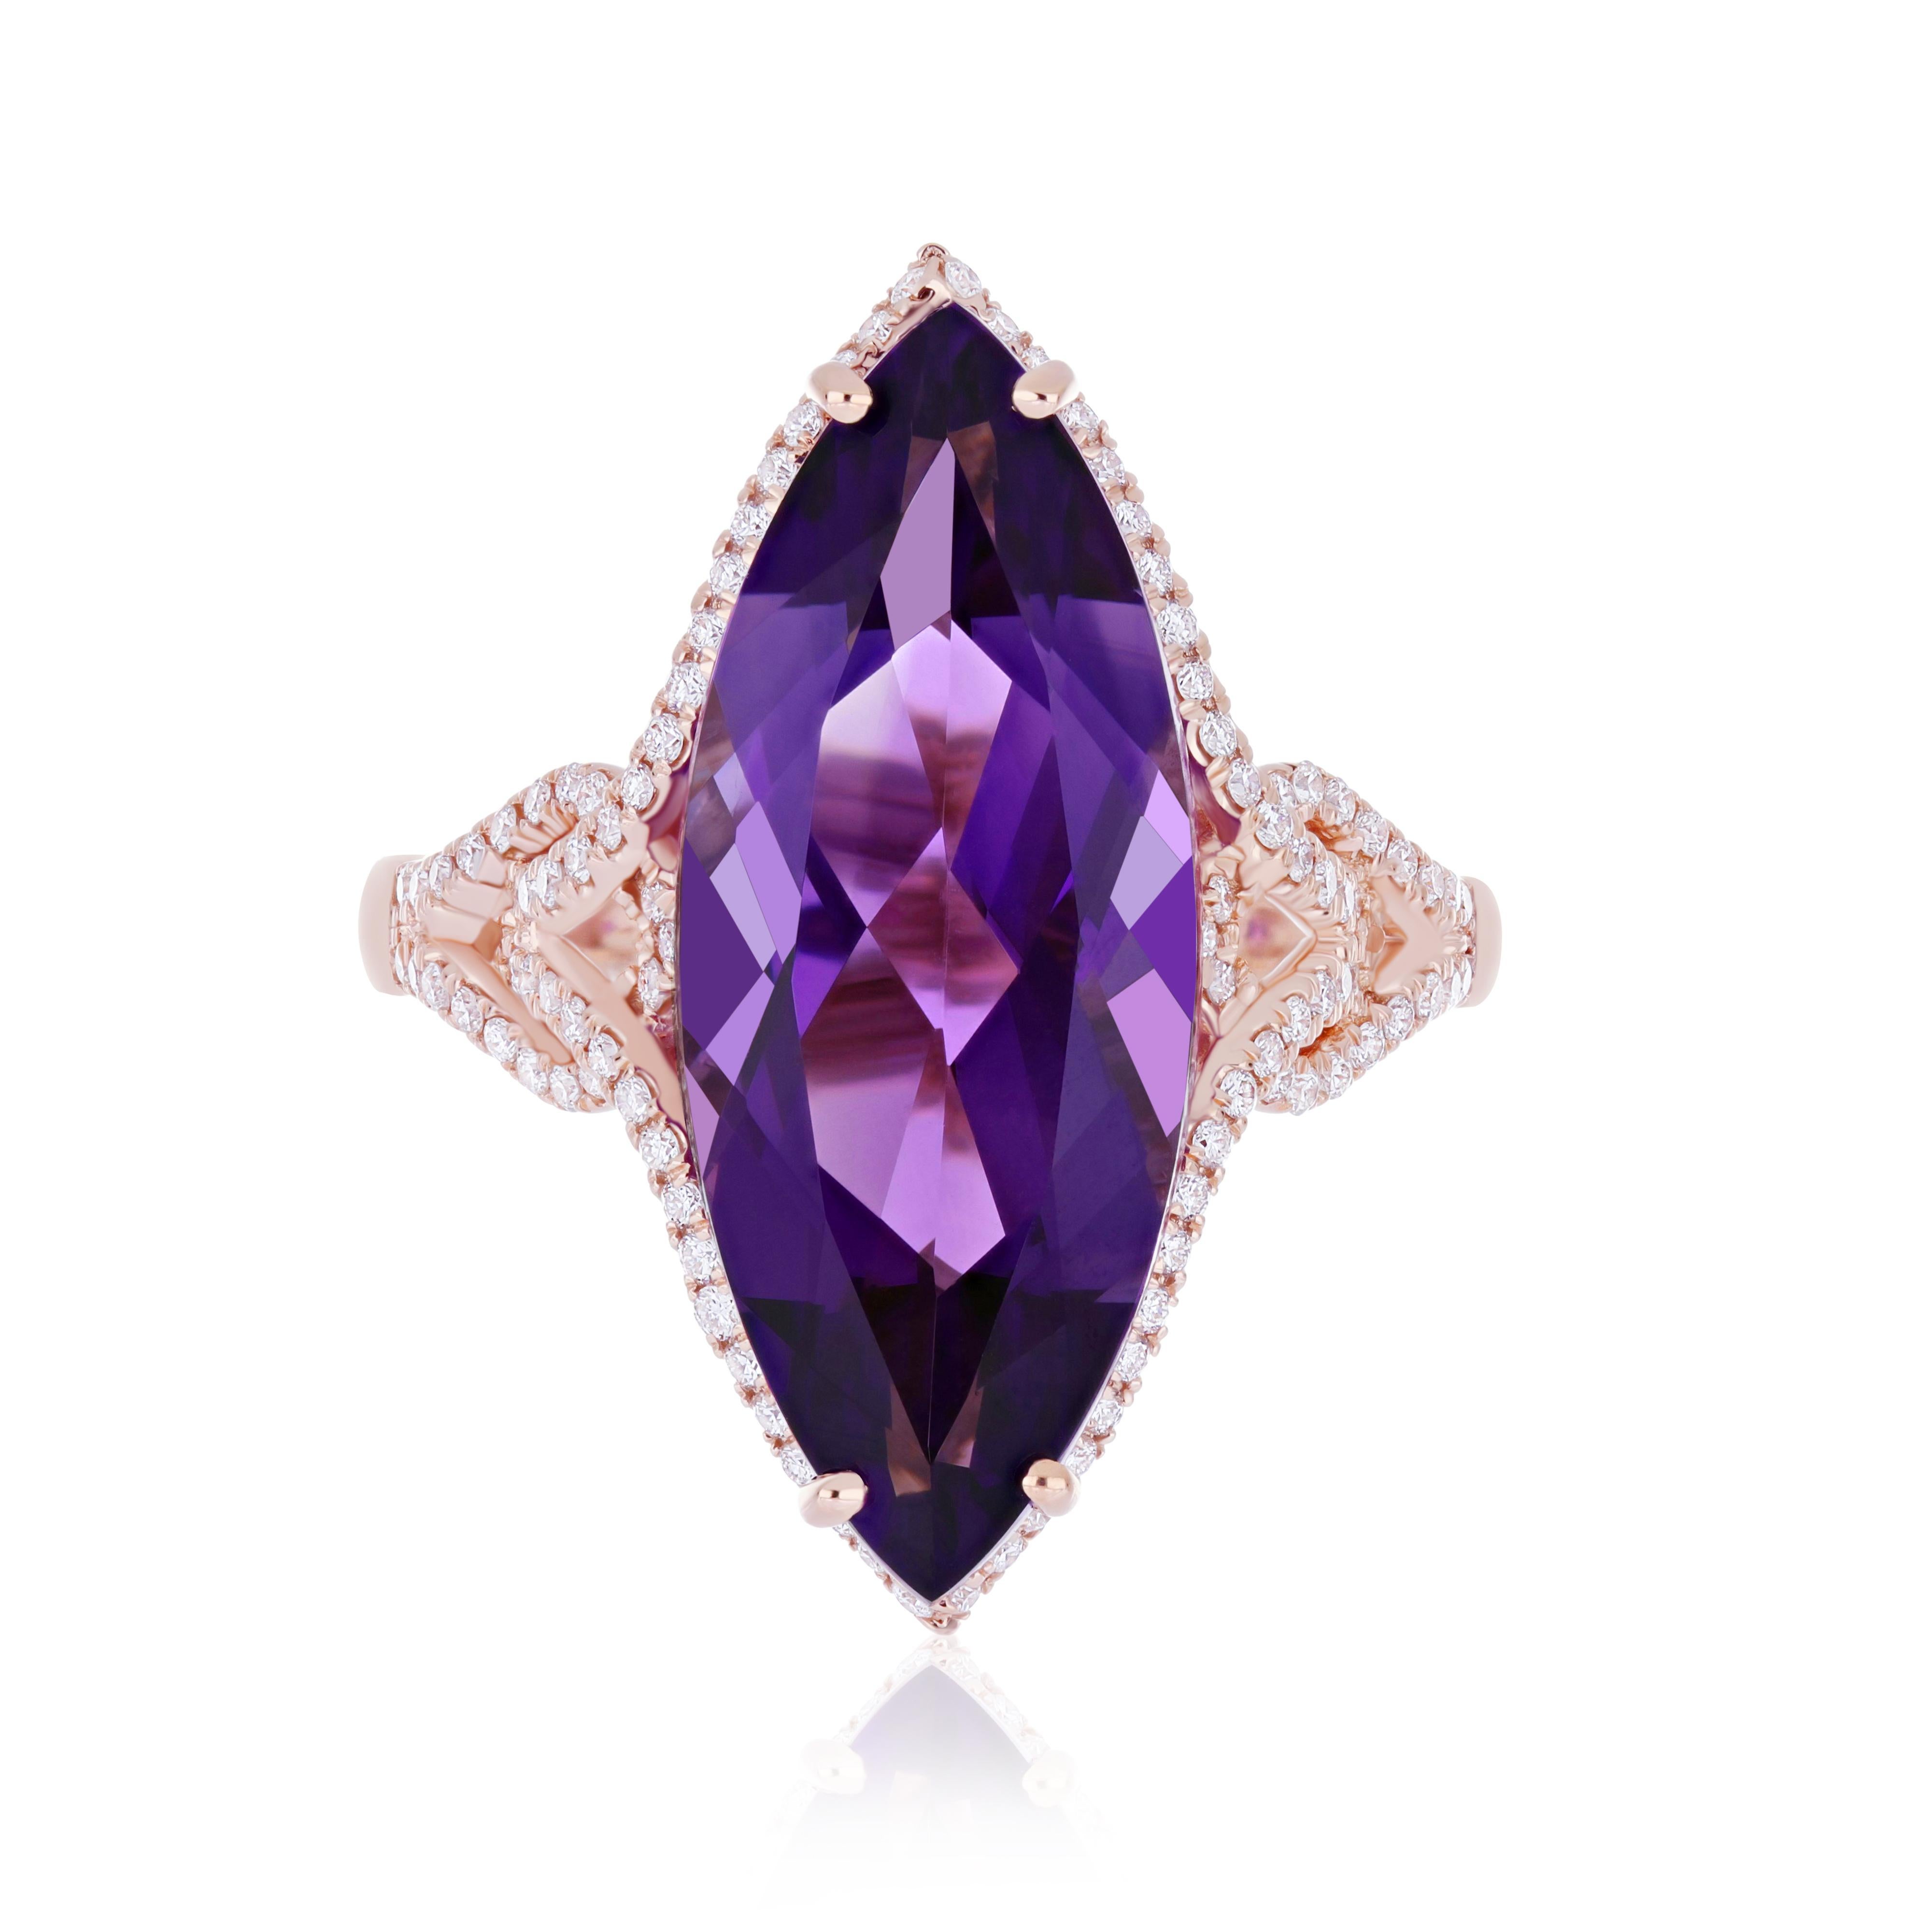 For Sale:  9.85cts Amethyst and Diamond Ring in 14karat Rose Gold Cocktail Ring for Wedding 6